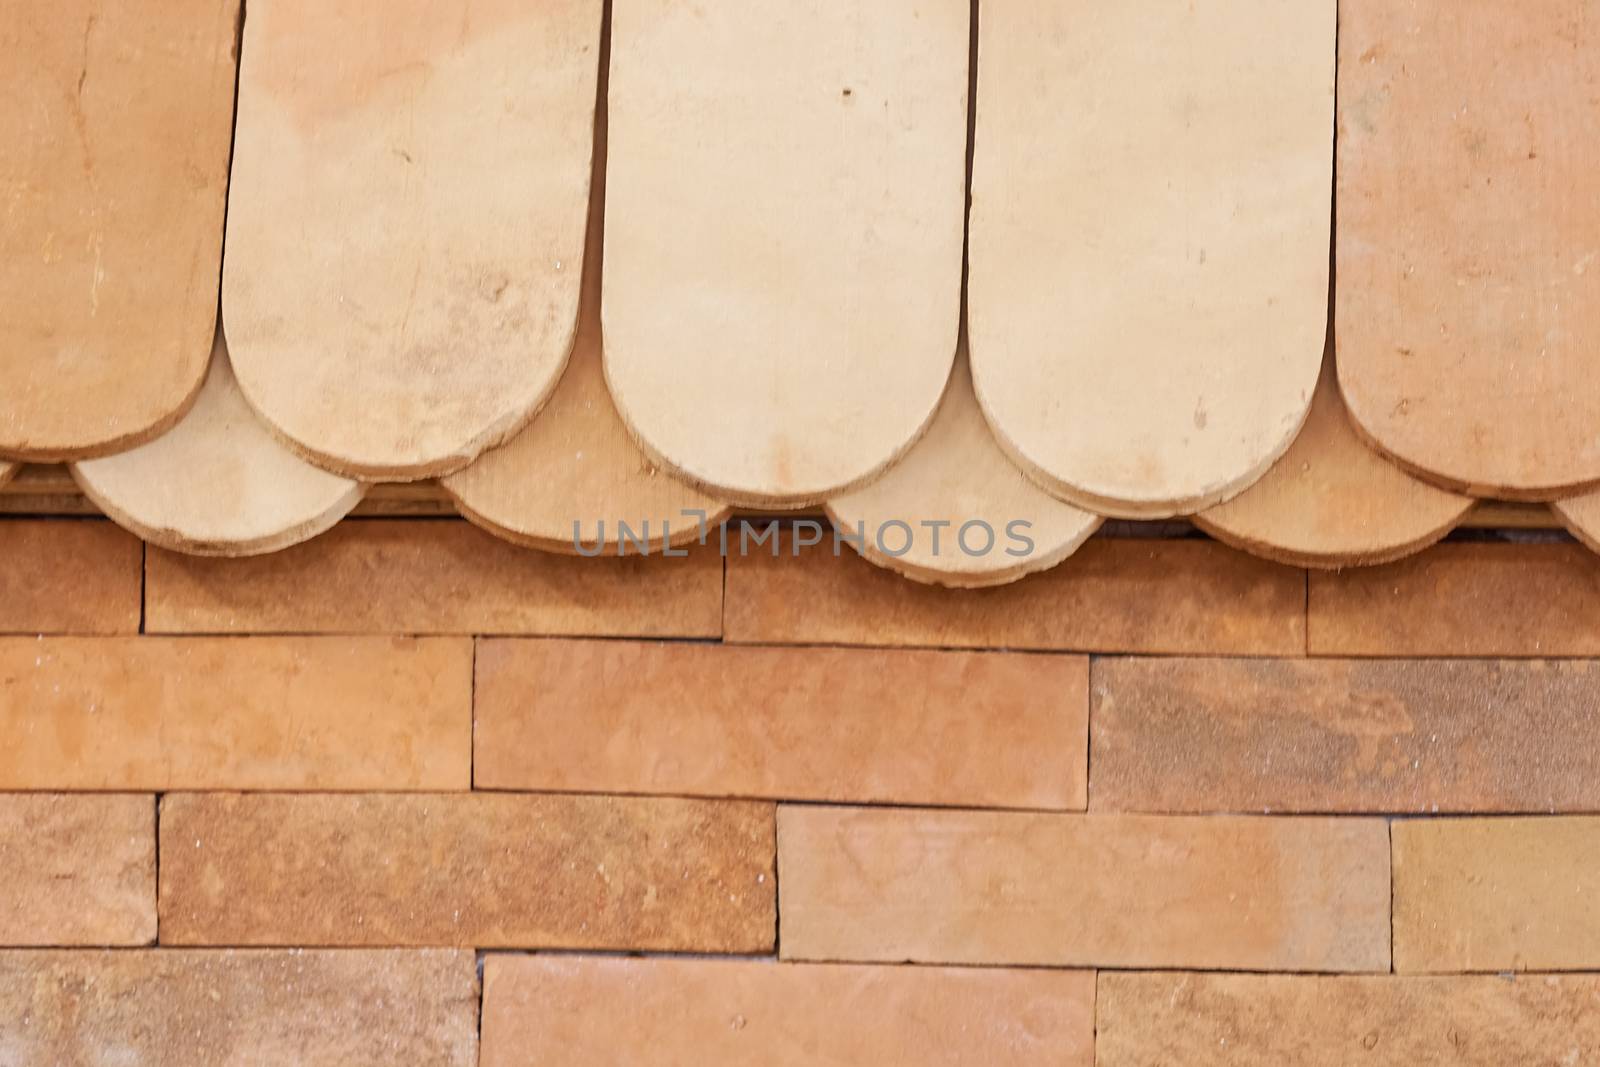 semi-circular roof tiles, note shallow depth of field